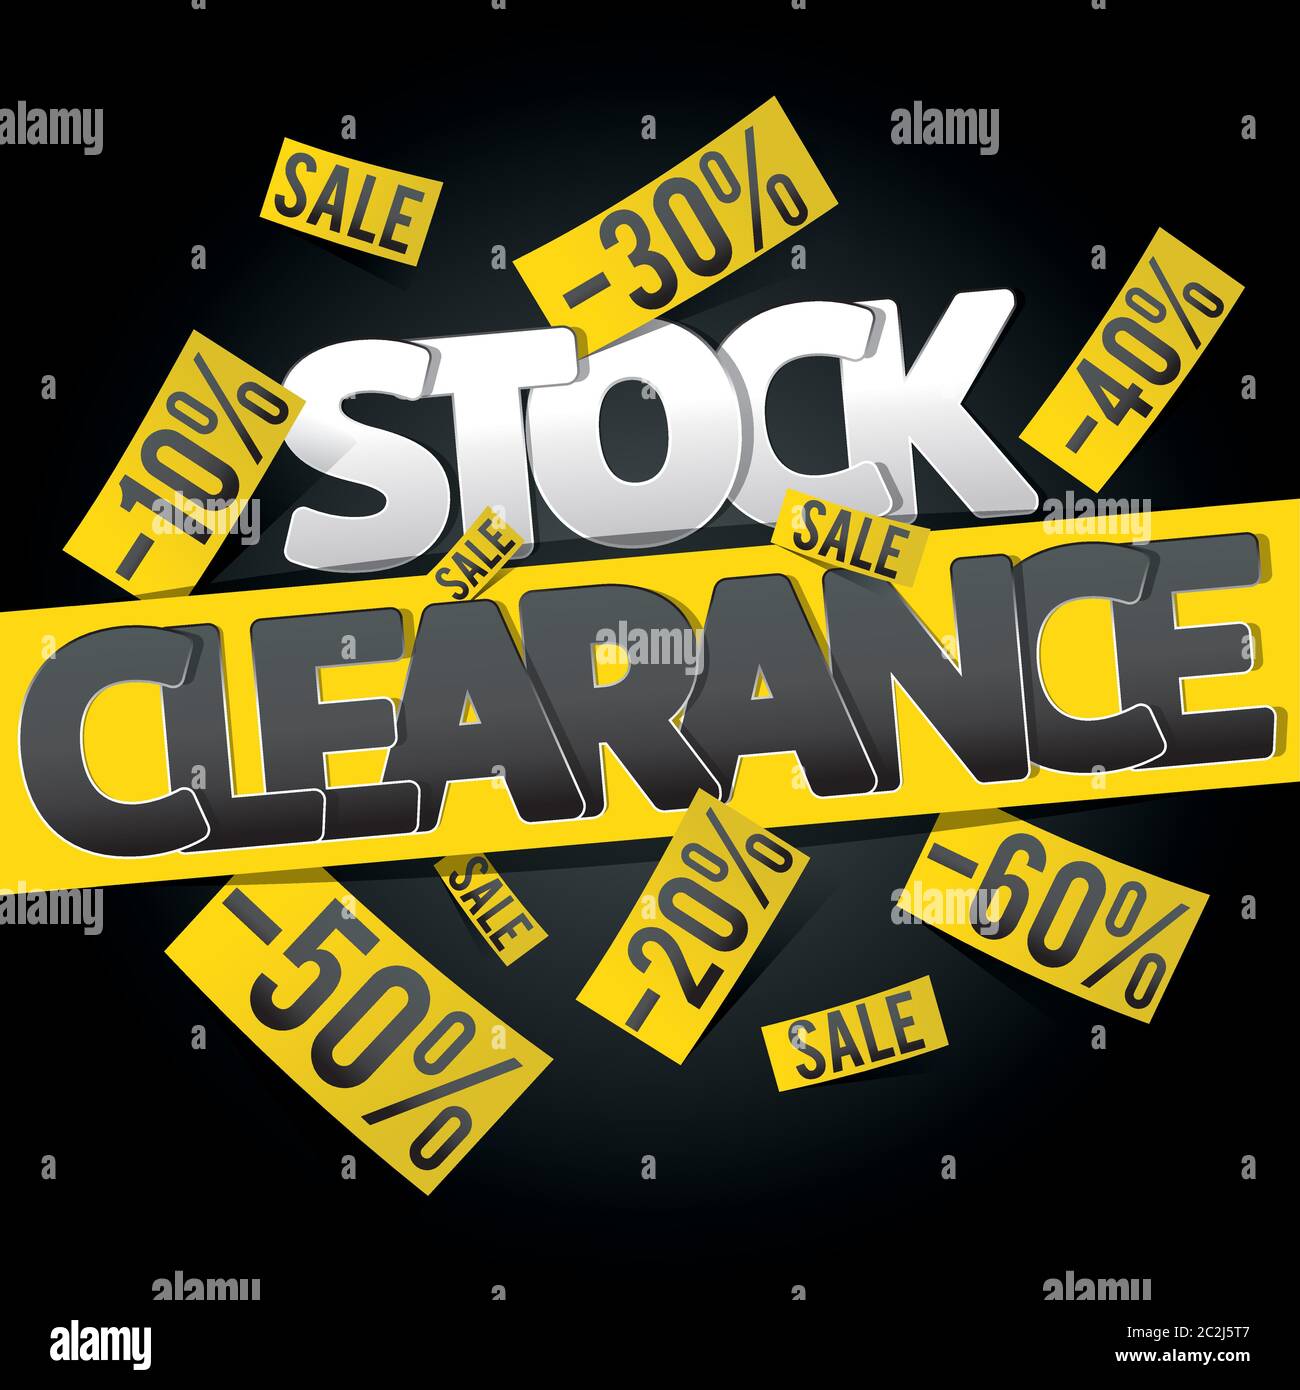 Stock clearance banner, flyer or poster design template Stock